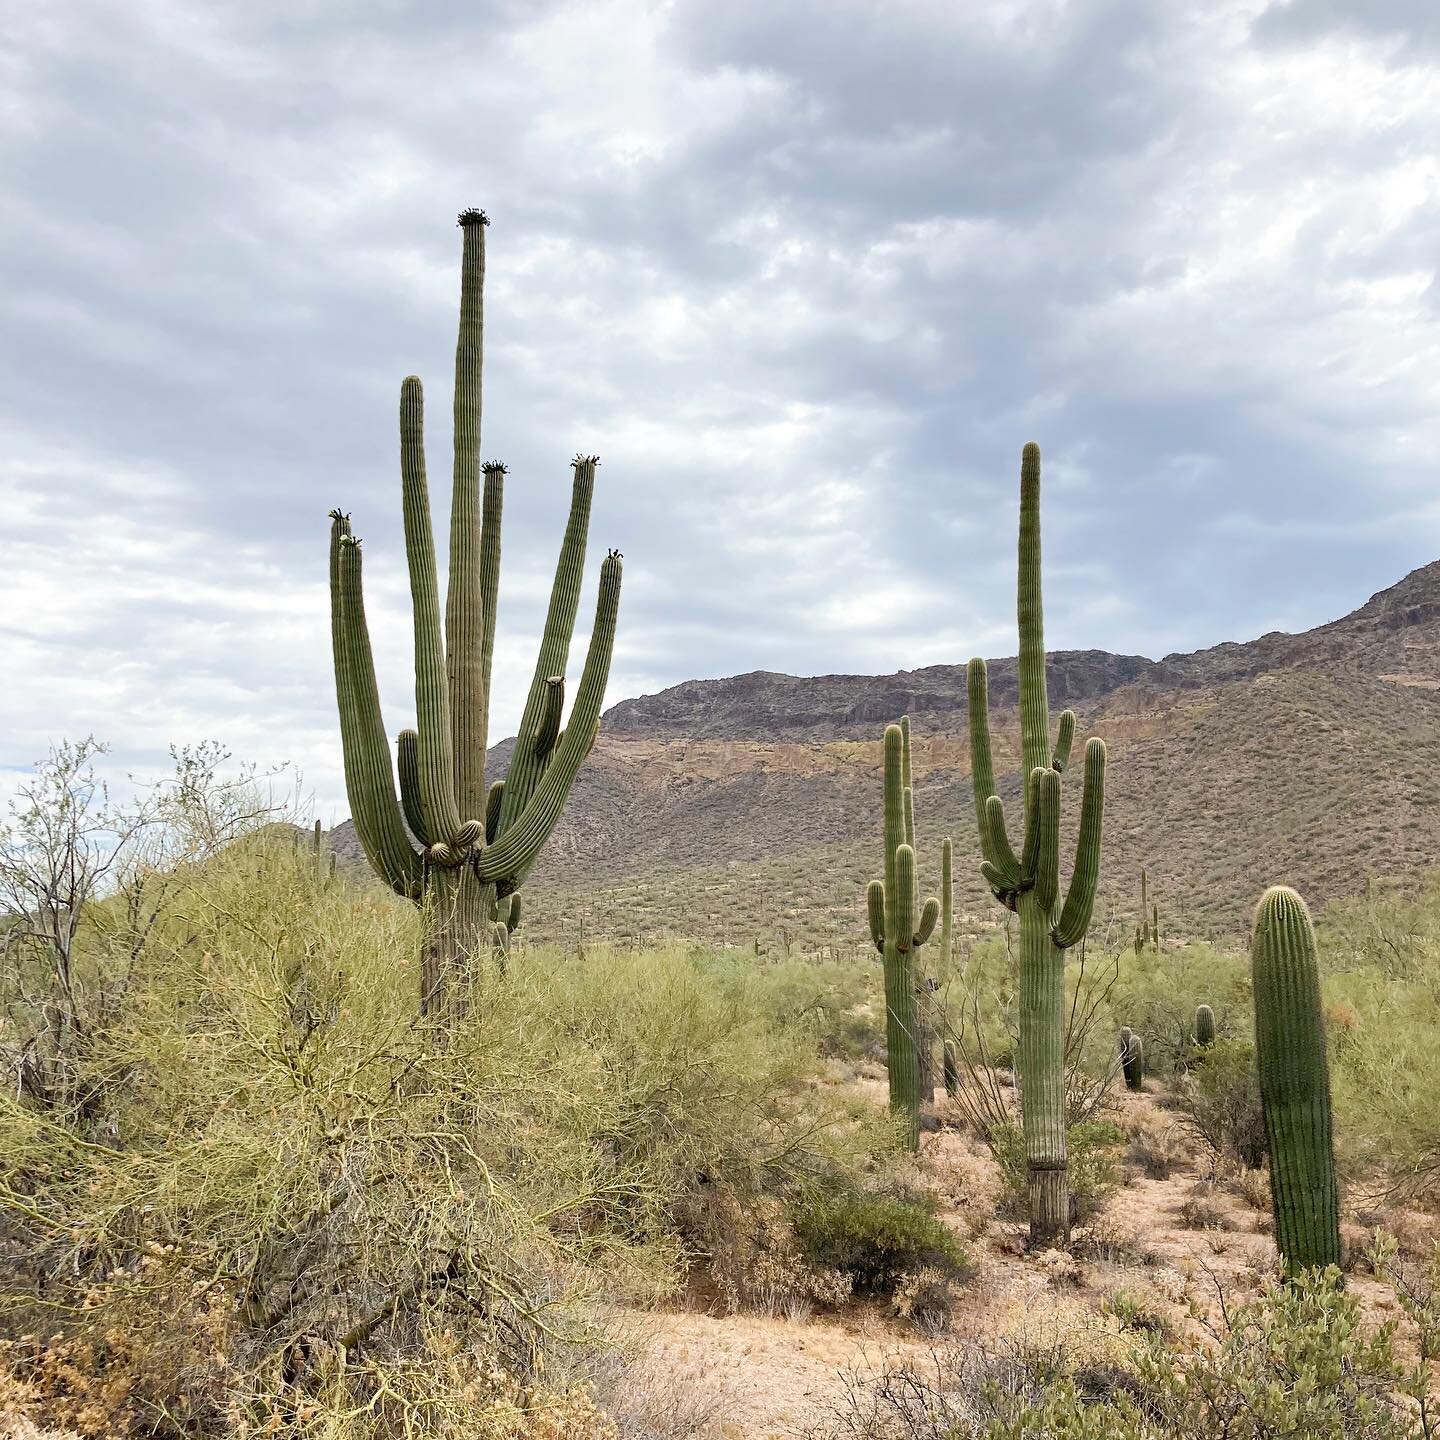 The Sonoran Desert. No where in the world like it. 

SWIPE FOR MUSIC NATIVE TO THE SONORAN DESERT